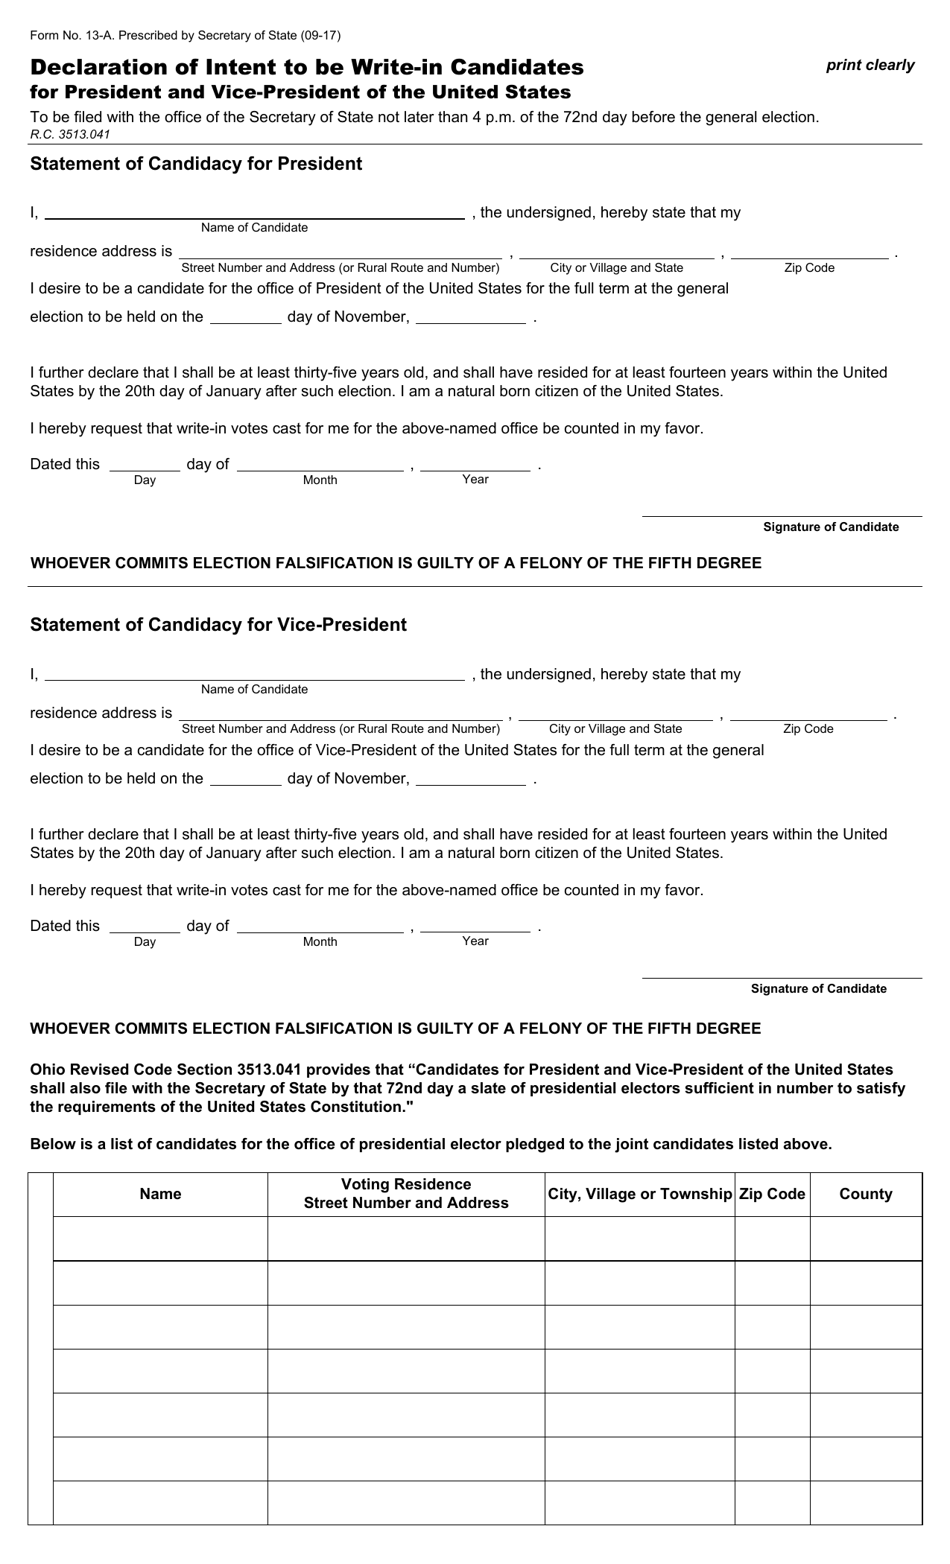 Form 13-A Declaration of Intent to Be Write-In Candidates for President and Vice-President of the United States - Ohio, Page 1